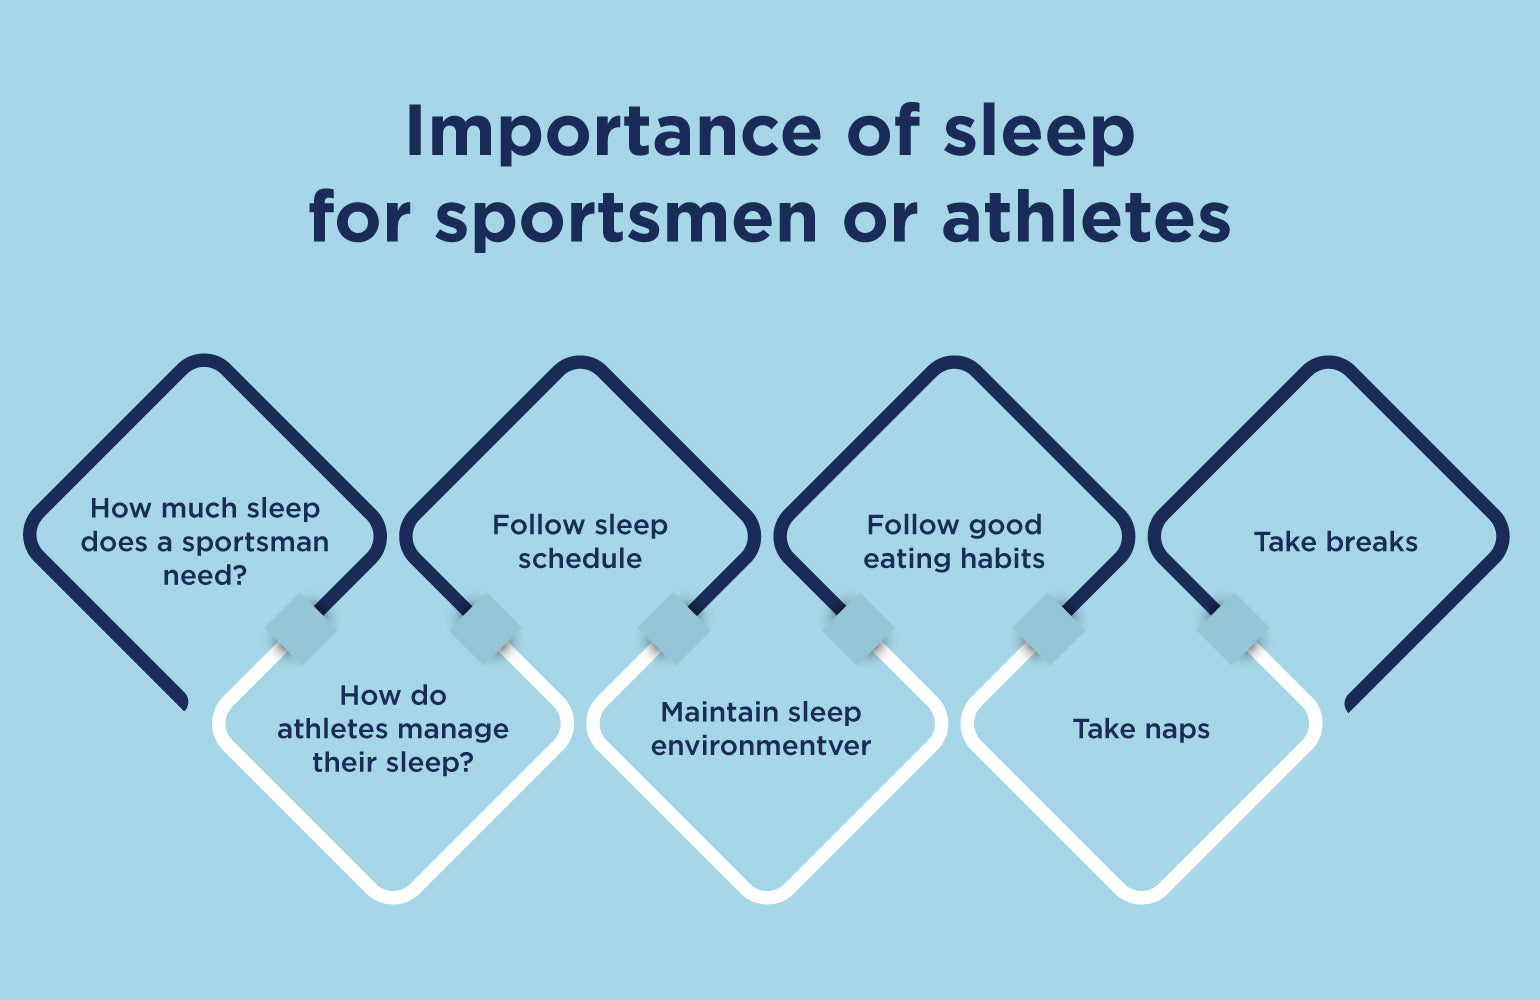 Importance of sleep for sportsmen or athletes